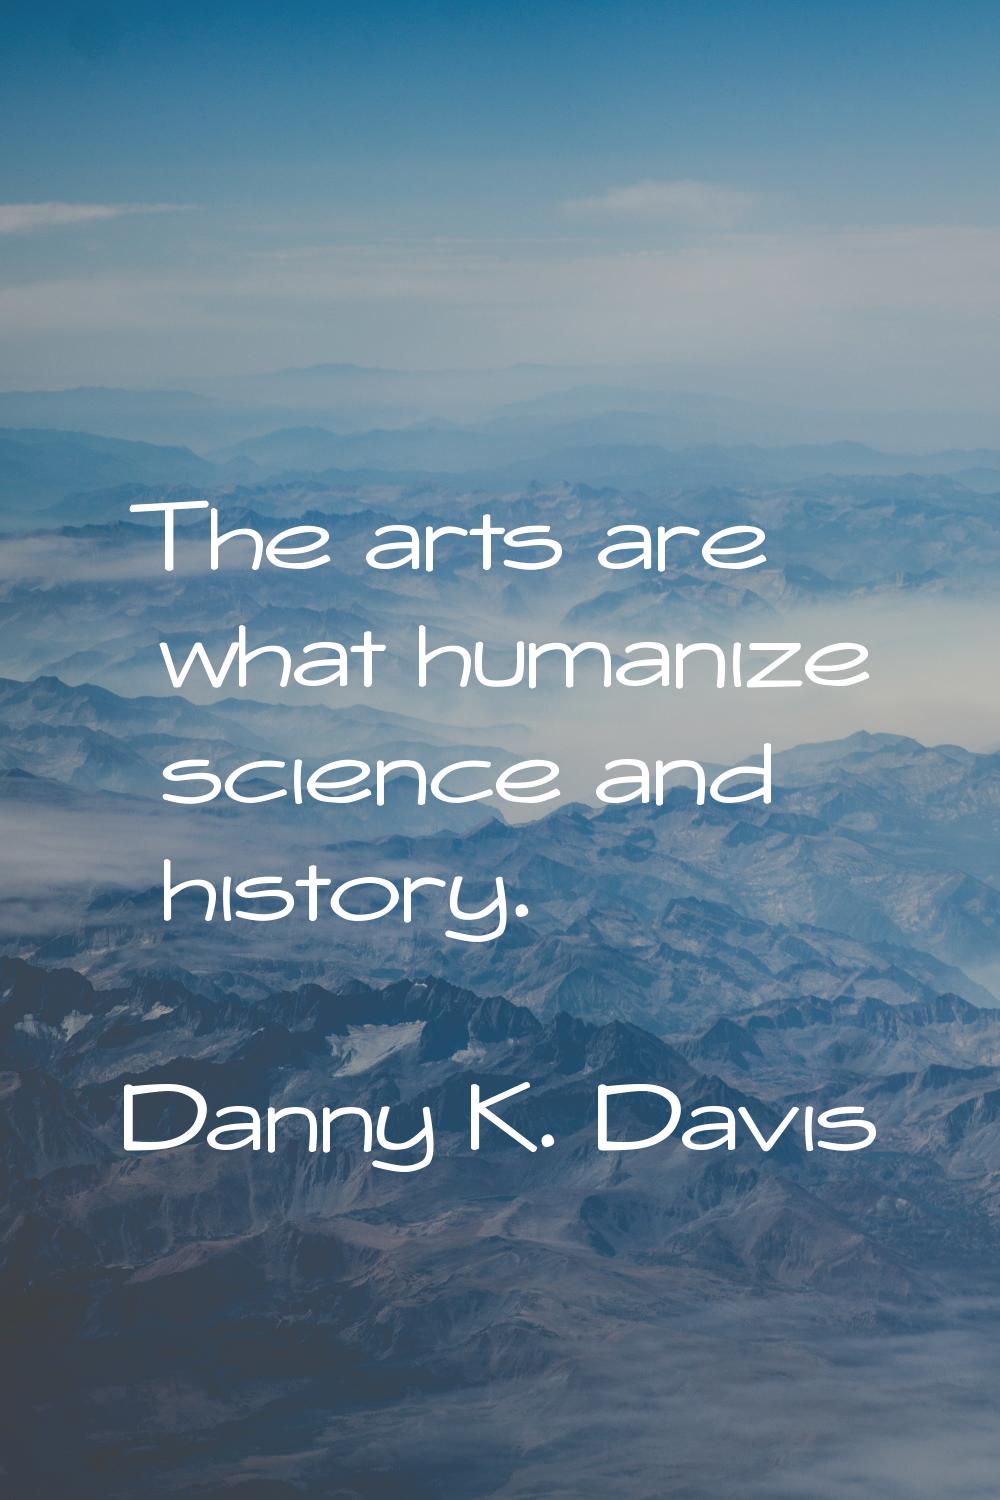 The arts are what humanize science and history.